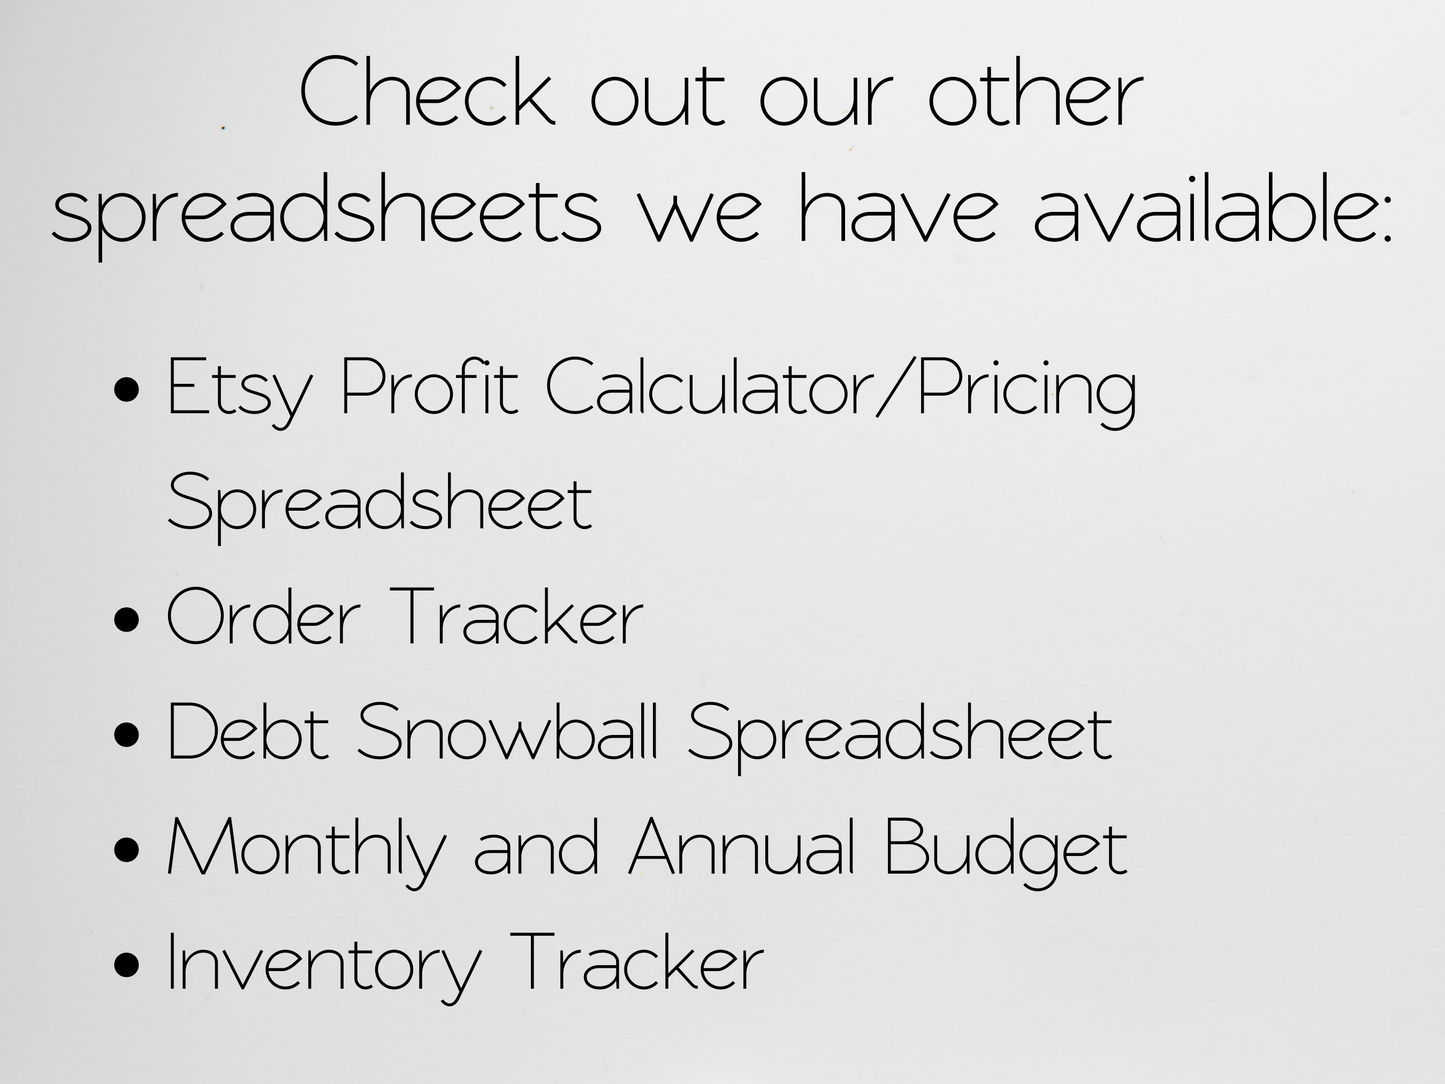 Income and Expenses Template Google Sheets Excel Spreadsheet